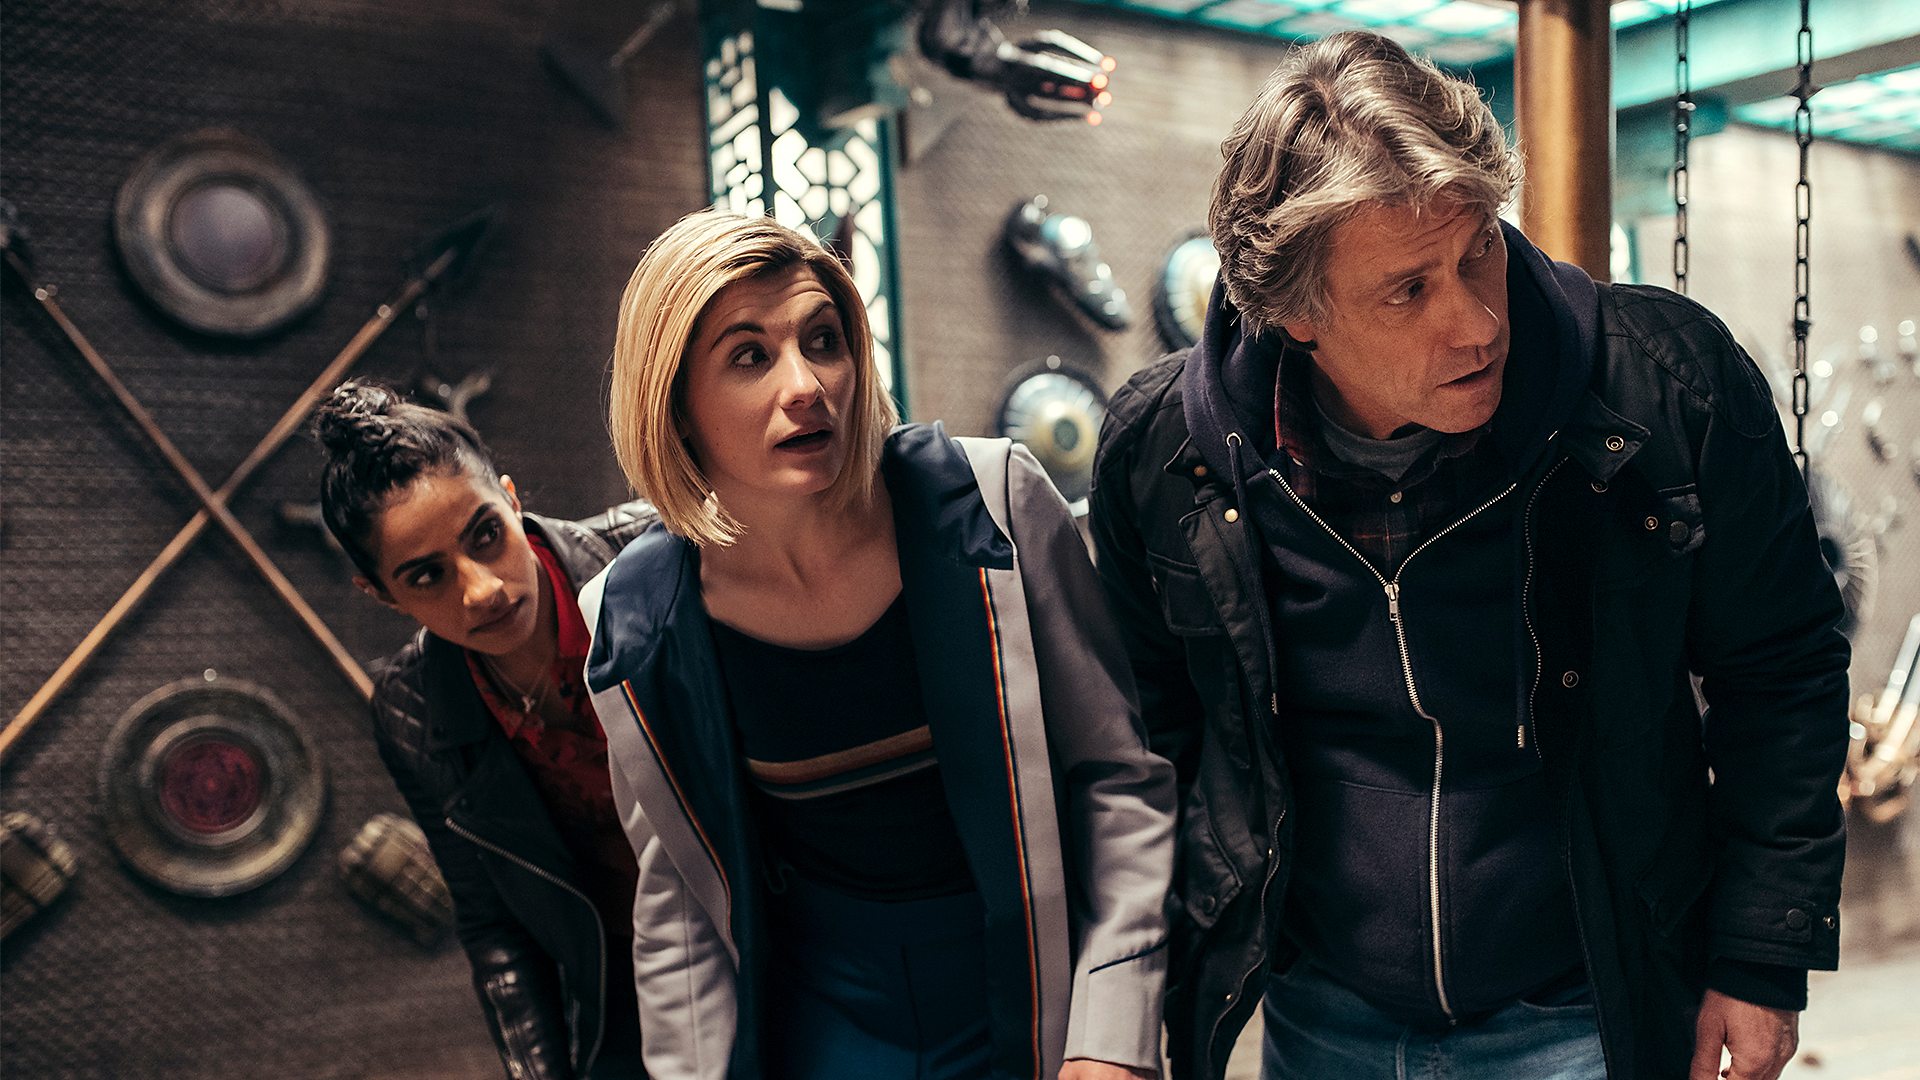 ‘Doctor Who: Flux’: 10 Things You May Not Know About ‘The Halloween Apocalypse’